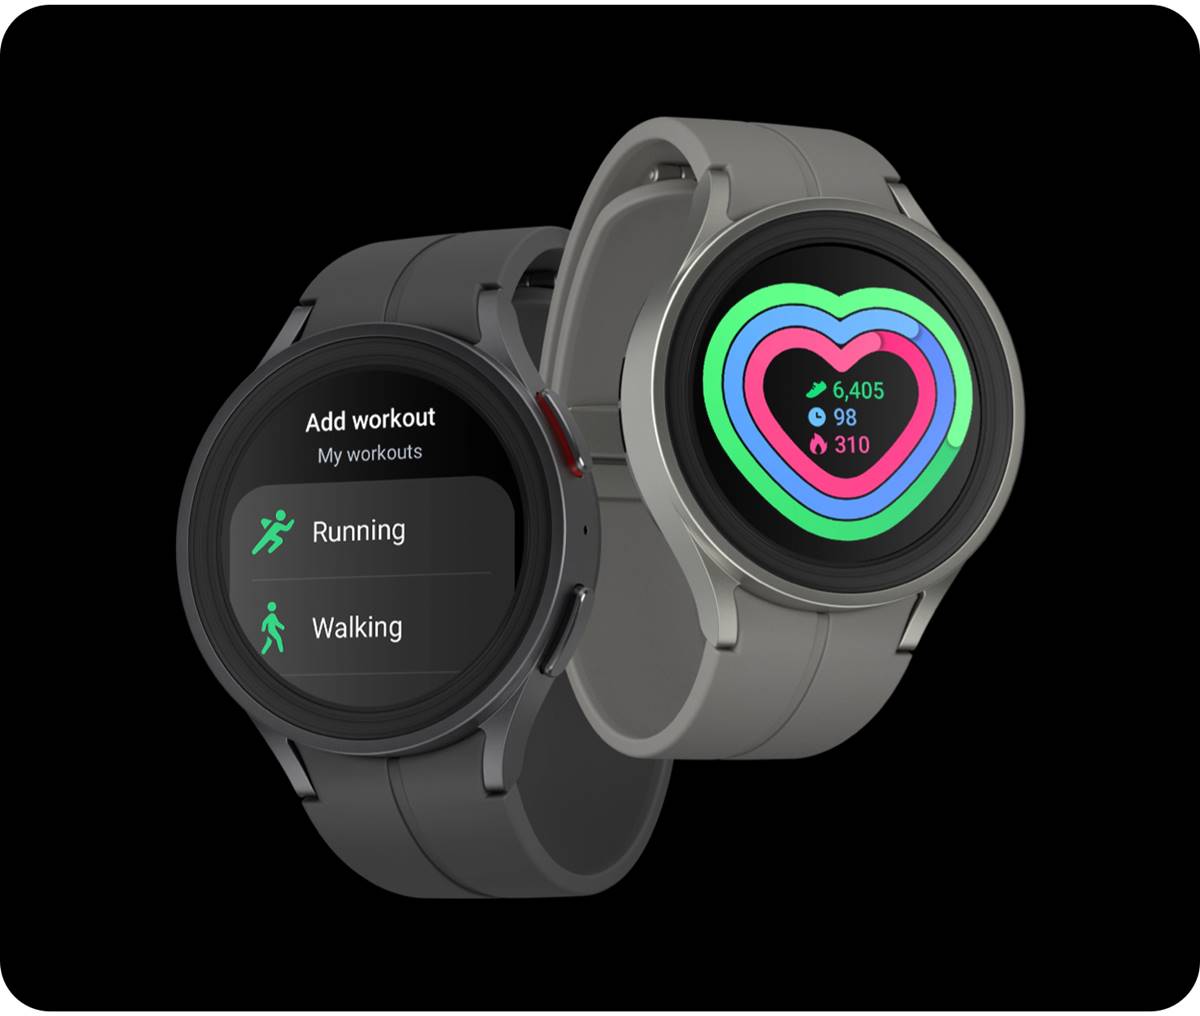 Samsung Galaxy Watch5 Pro Released on 2022, August 26 | 46.5g, 10.5mm thickness | Android Wear OS 4, One UI Watch 5 | 16GB storage, no card slot | 1.4"450x450 pixels | NO | 1.5GB RAMExynos W920 | 590mAhLi-Ion